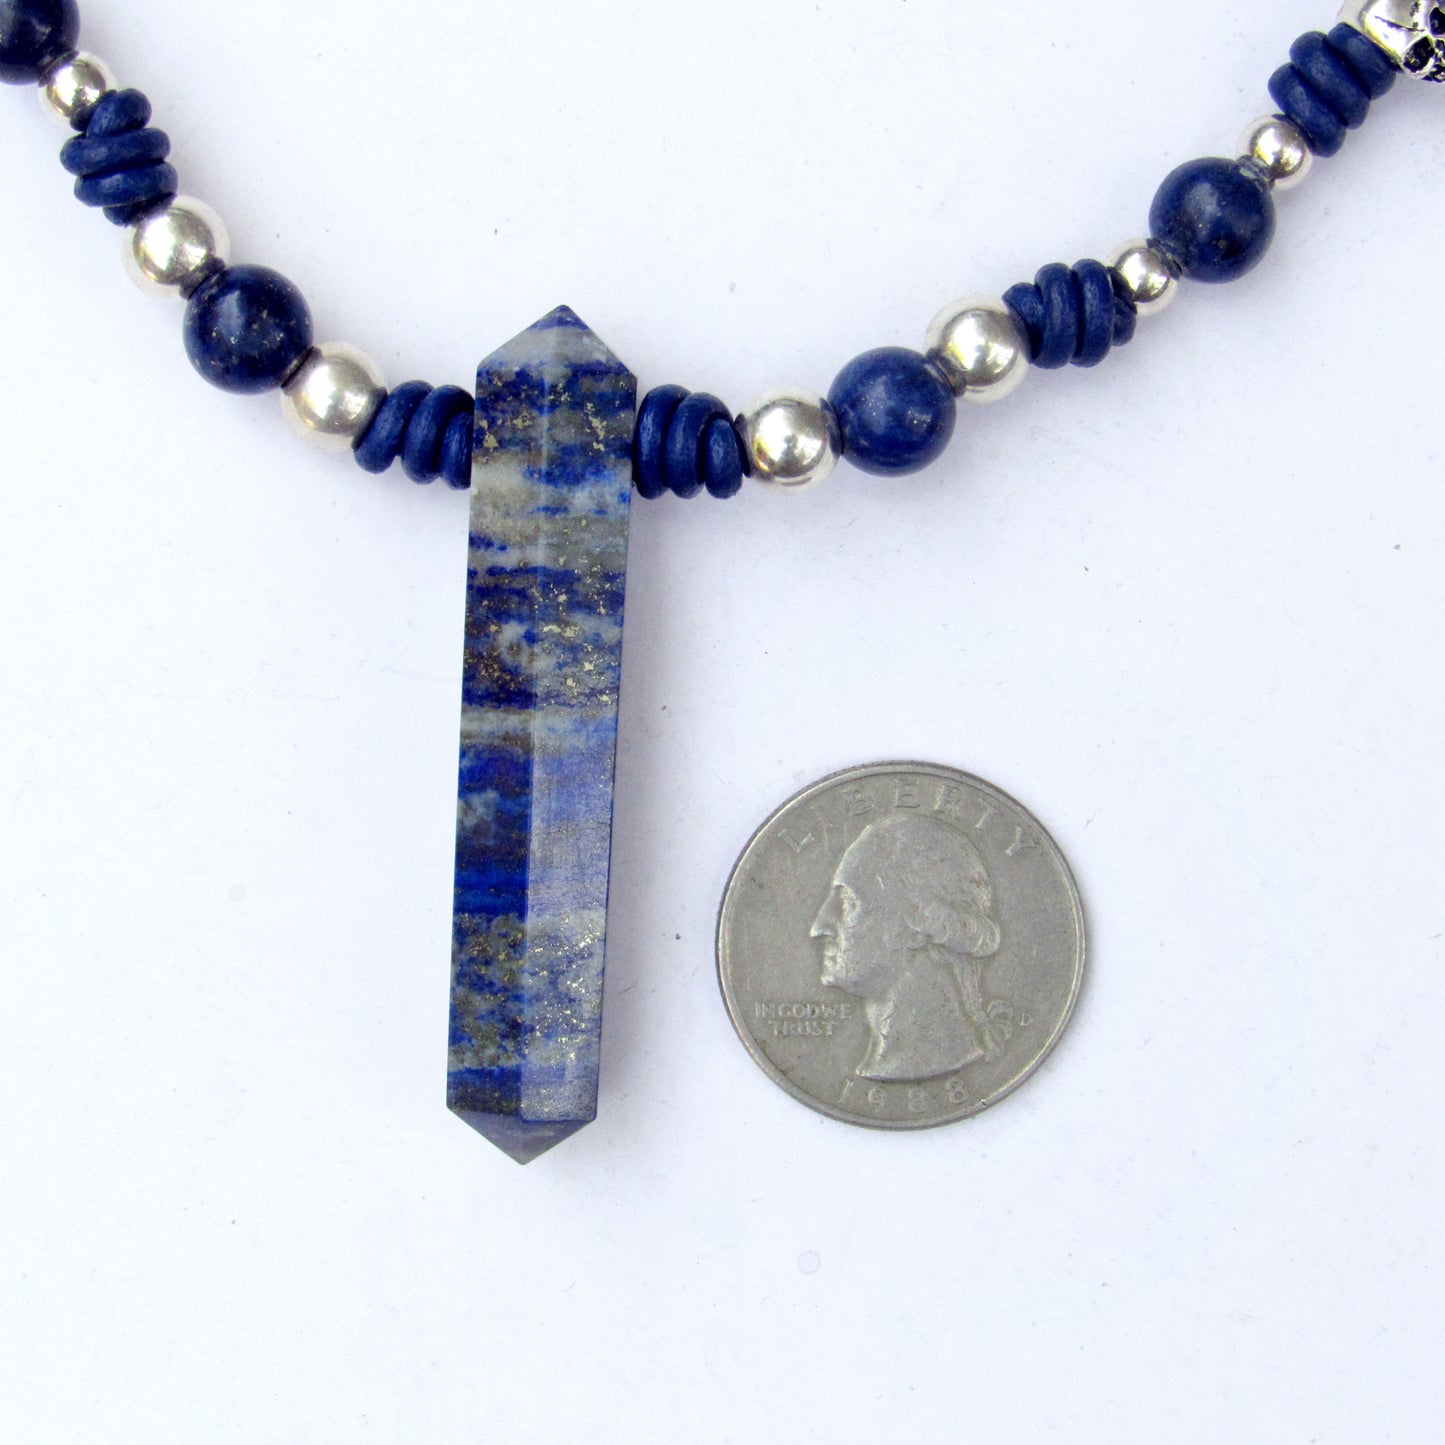 Lapis Lazuli and Sterling Silver Skulls Hand Knotted Sterling Silver Necklace